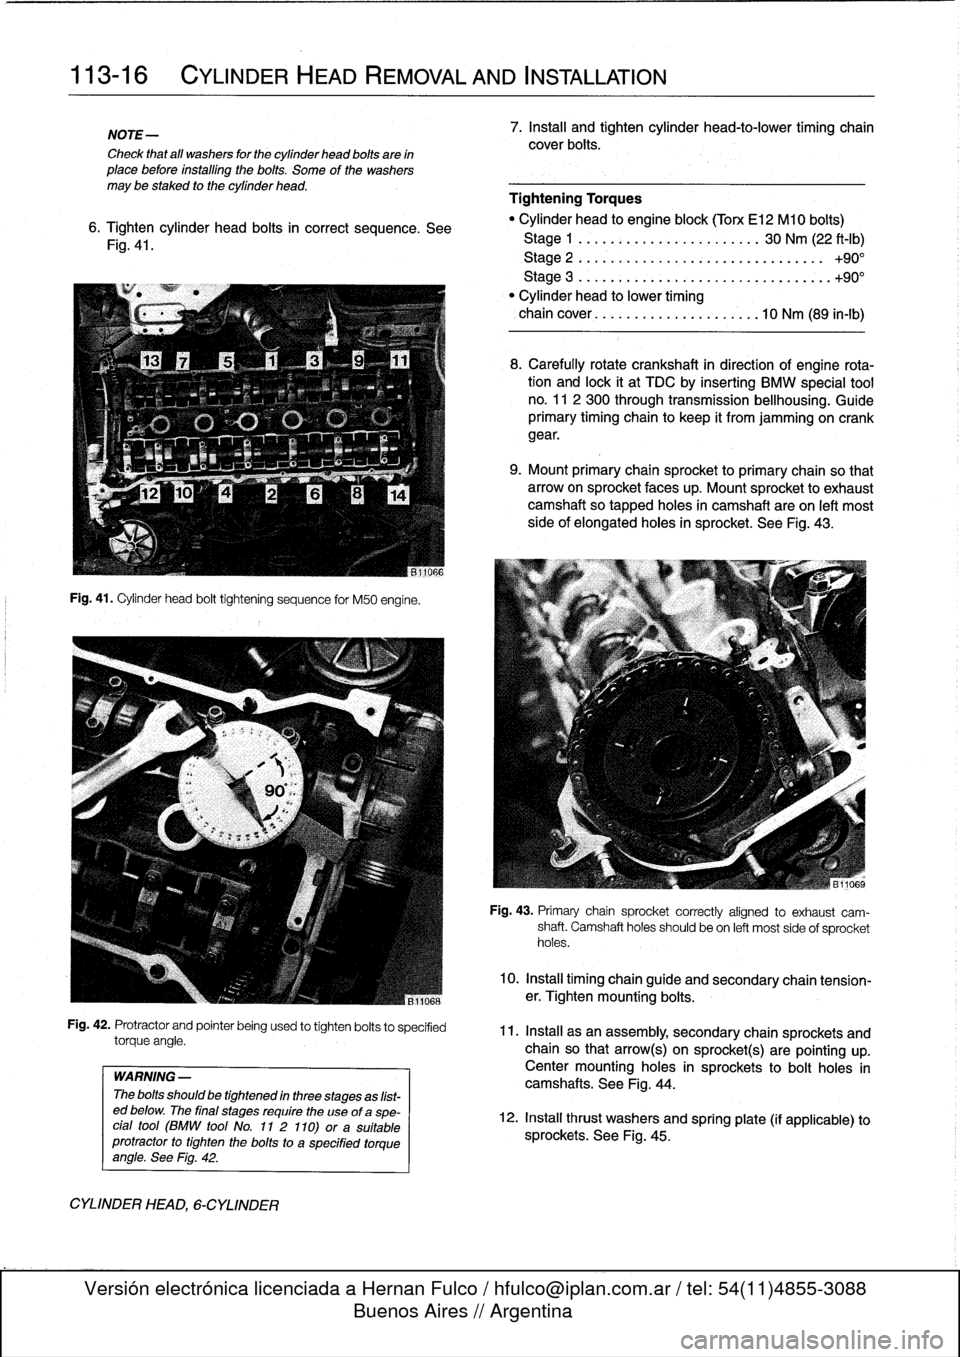 BMW M3 1993 E36 User Guide 
113-16

	

CYLINDER
HEAD
REMOVAL
AND
INSTALLATION

NOTE-

Check
that
all
washers
for
the
cylinder
head
bolts
are
in
place
before
installlng
the
bolts
.
Some
of
the
washers
may
be
staked
to
the
cylind